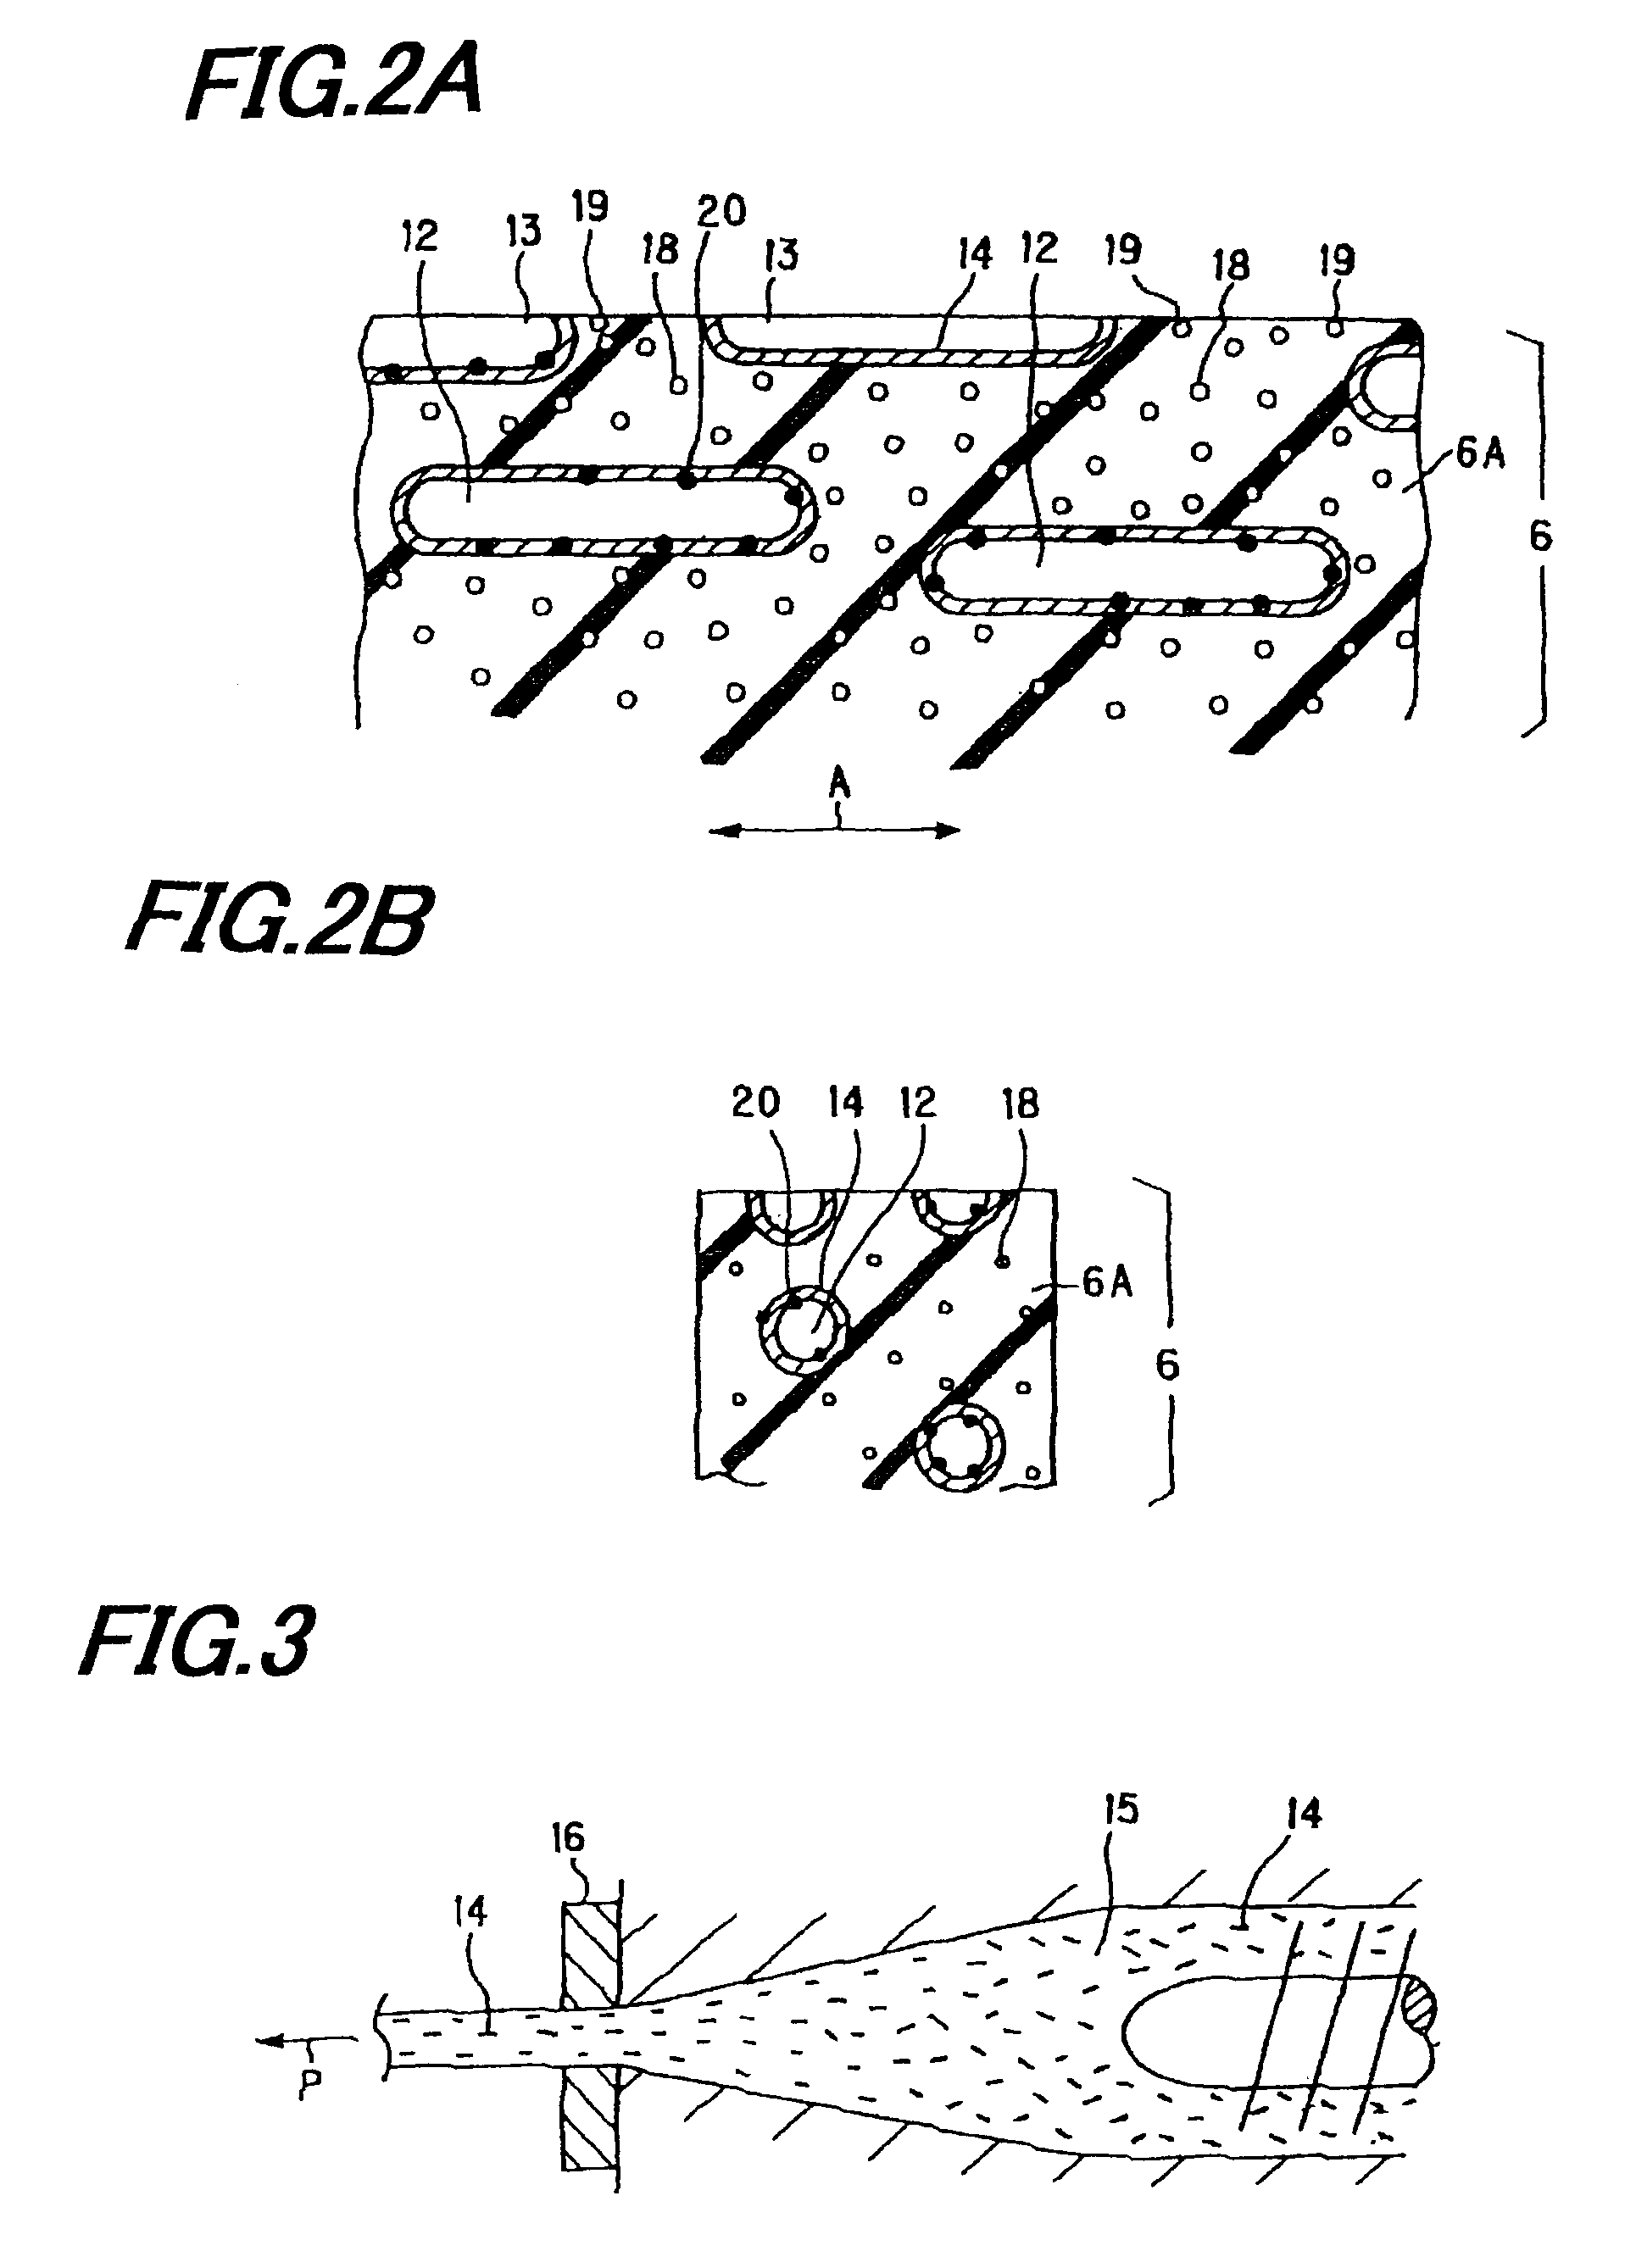 Tire with foamed rubber layer having organic fibers and inorganic compound powder